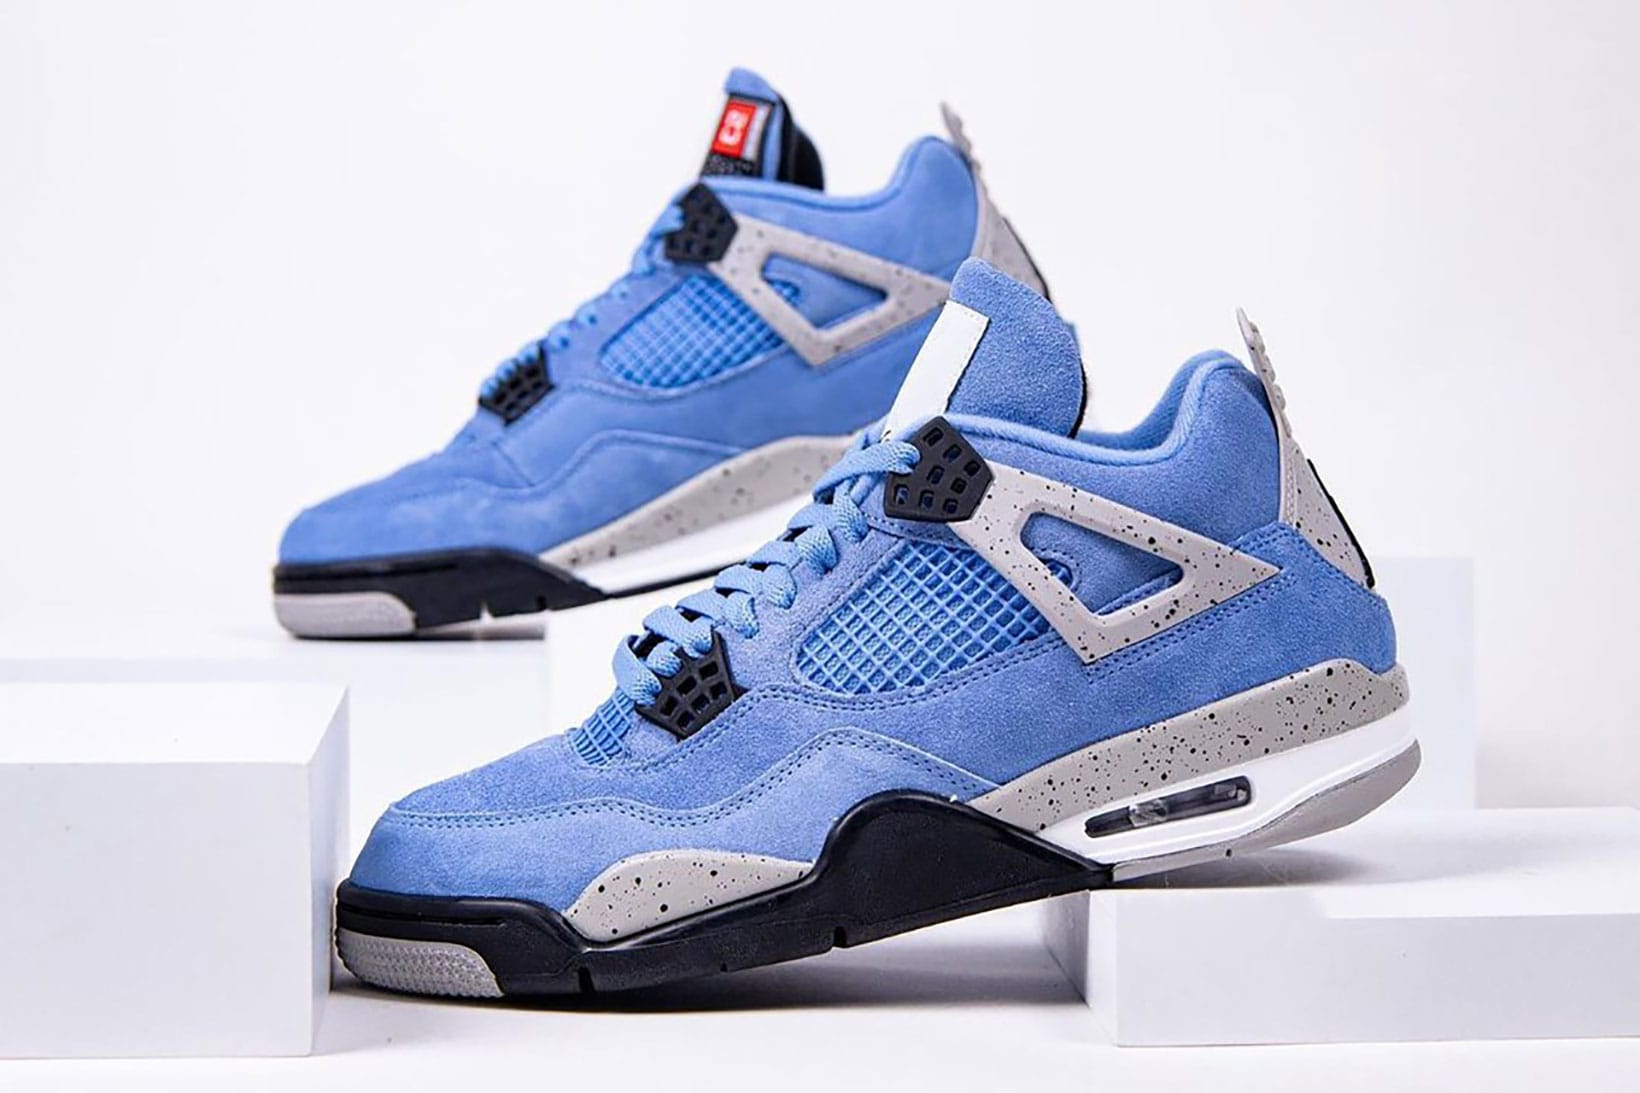 retro 4s coming out